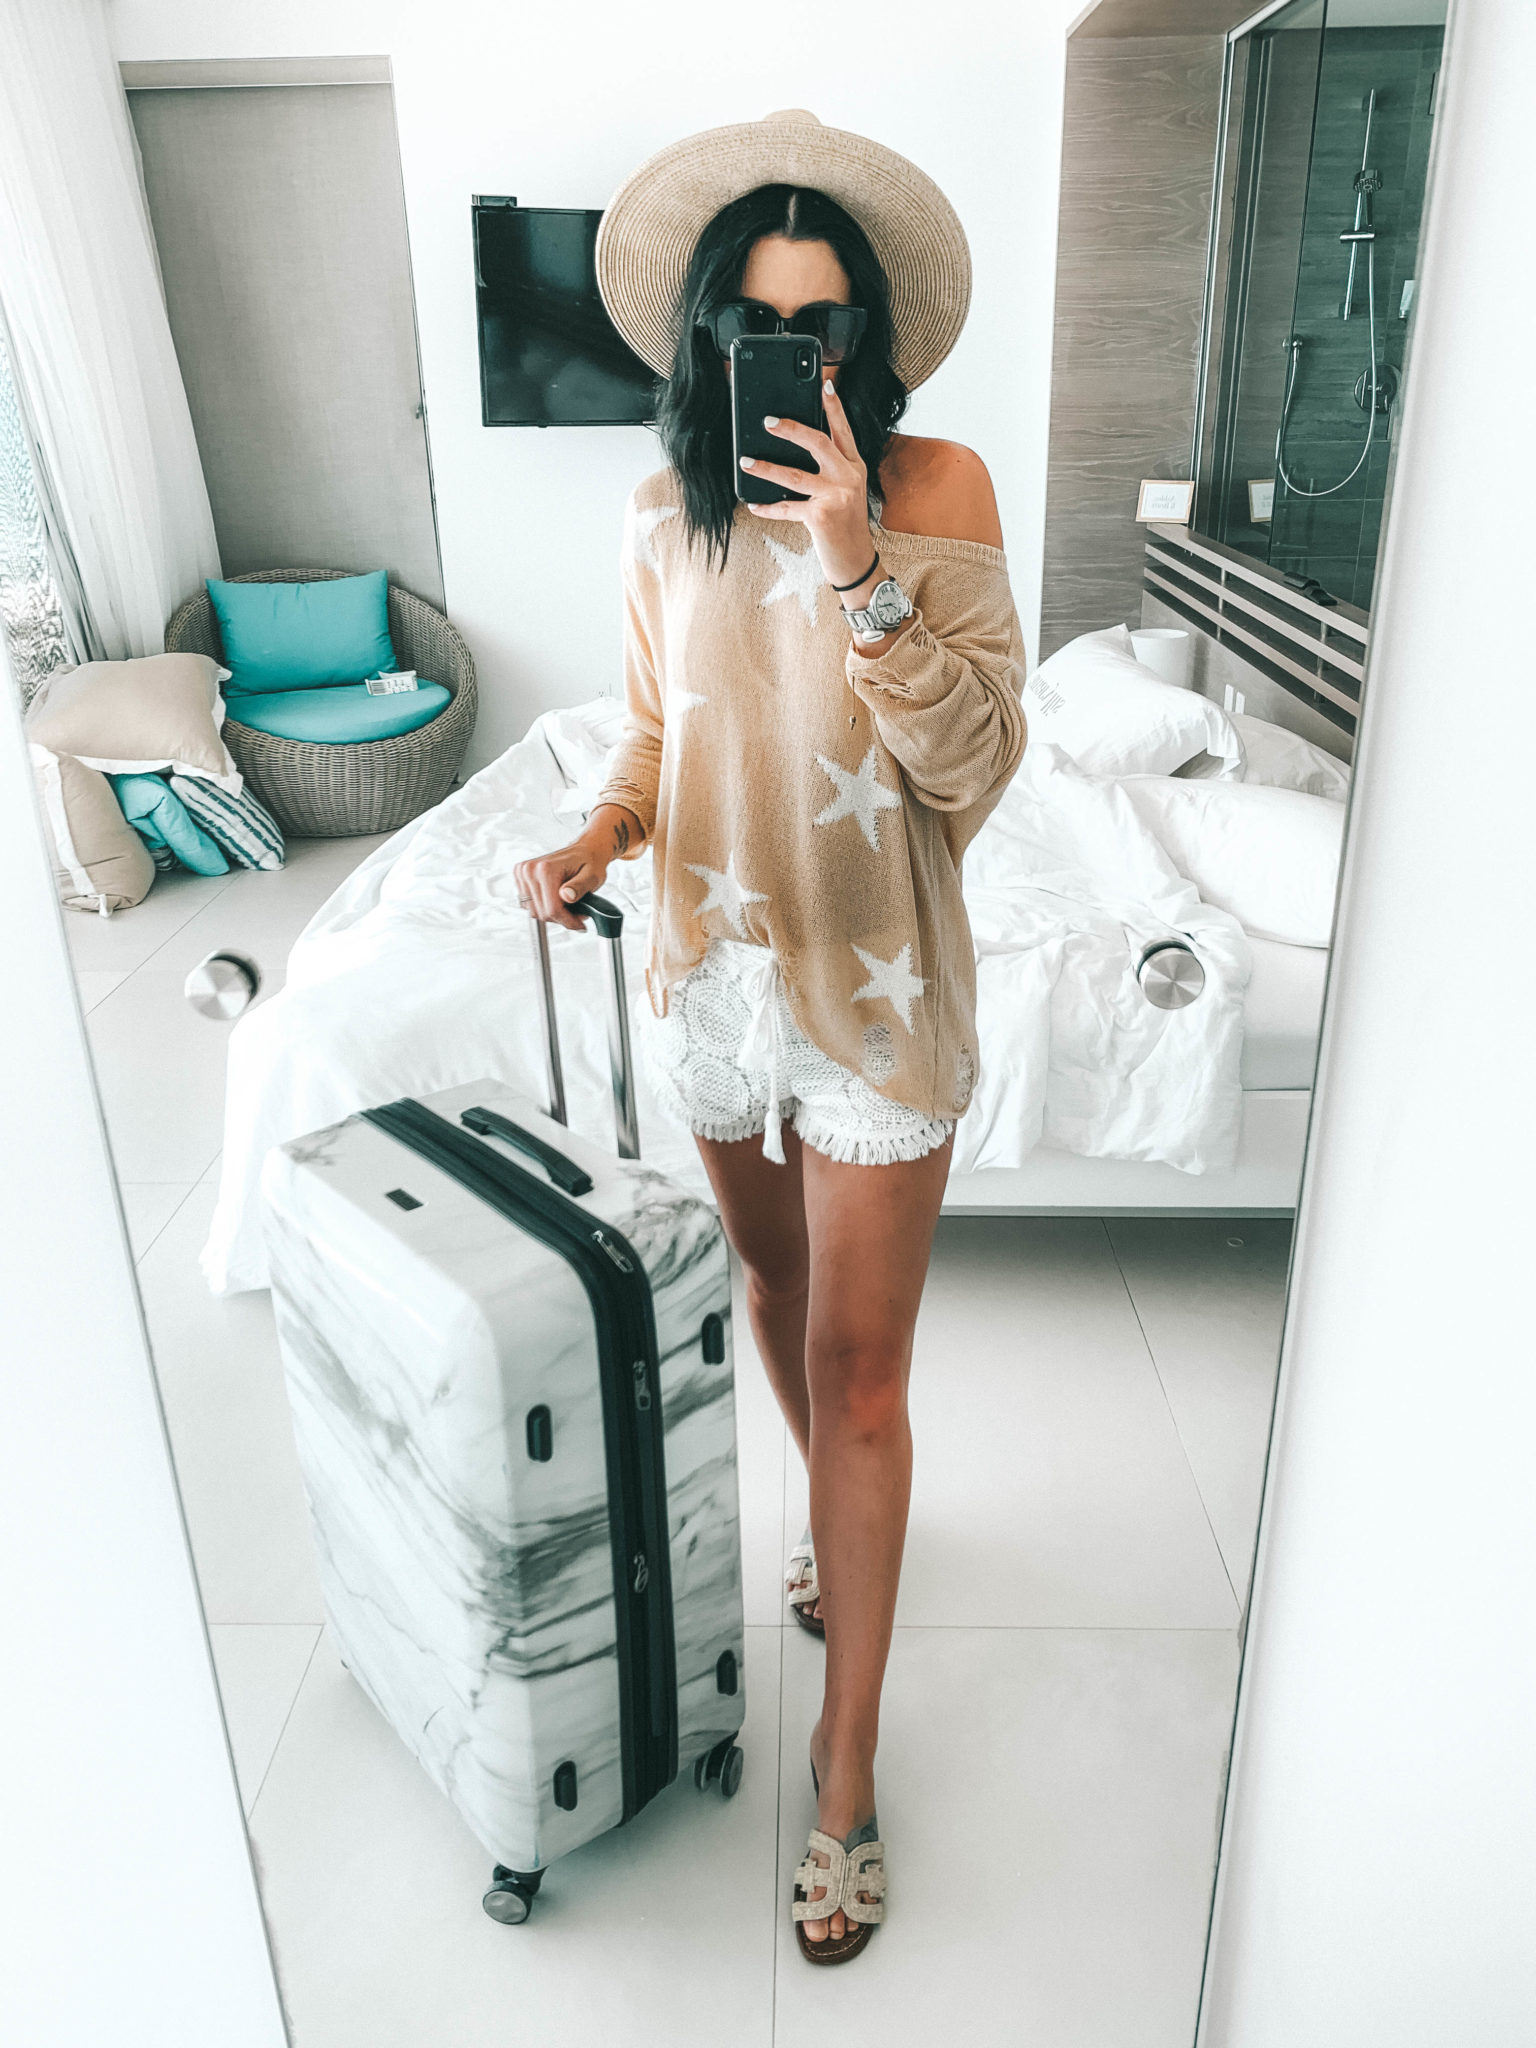 Amaryllis Apparel Abroad Turks & Caicos Summer Try-On by popular Austin fashion blog, Dressed to Kill: image of a woman wearing a Amaryllis Apparel Distressed Starry Eye Sweater and white Amaryllis Apparel Tahiti Crochet Shorts.